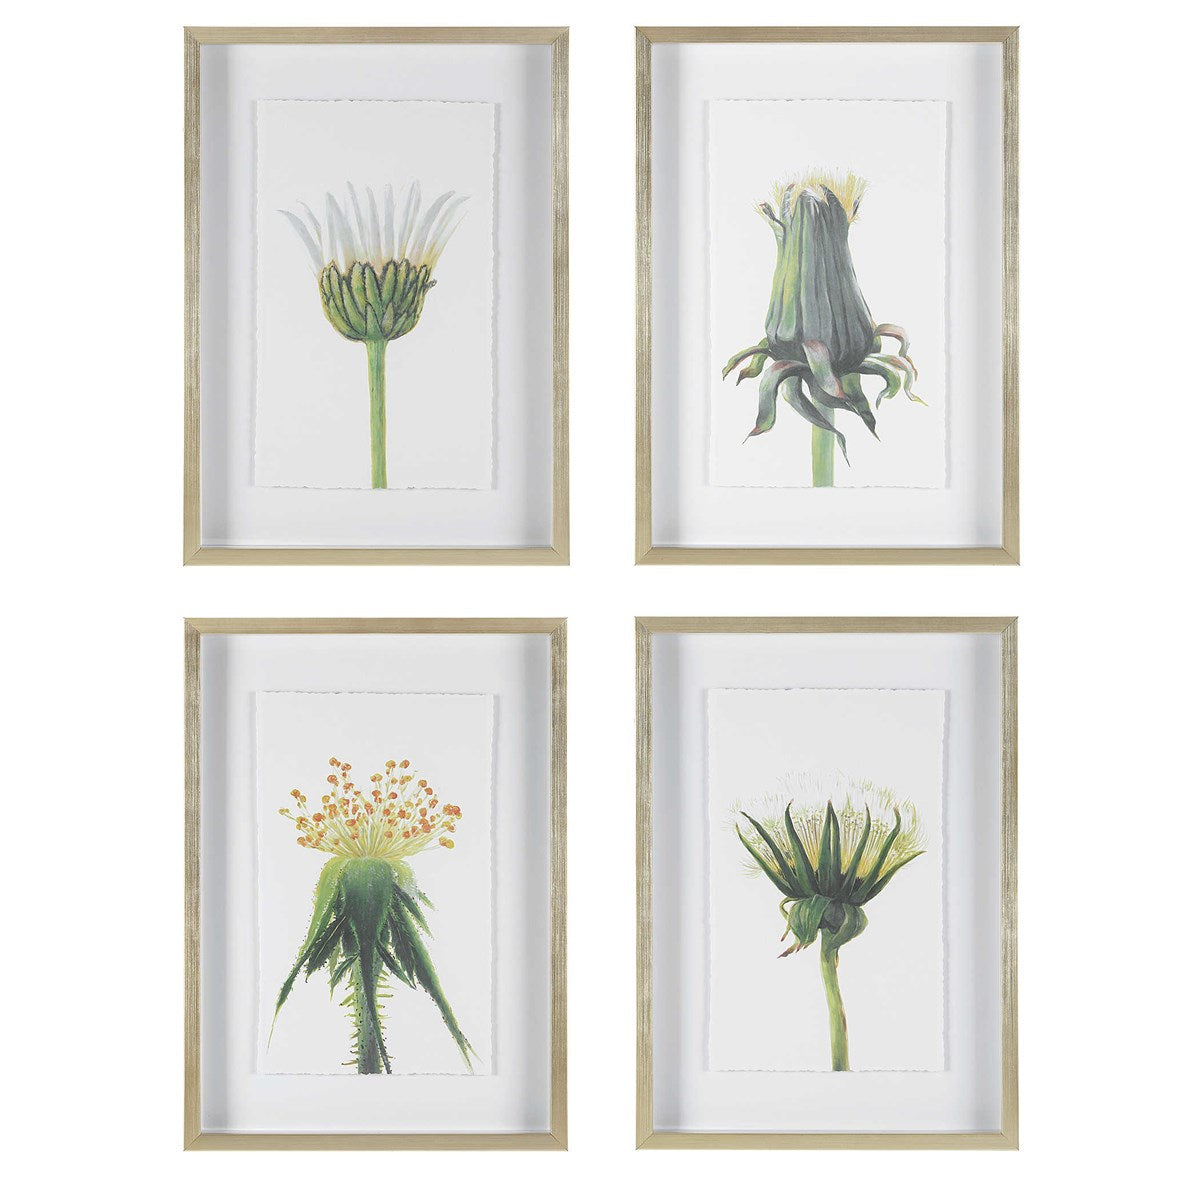 Wildflowers Framed Prints. Sold seperately.